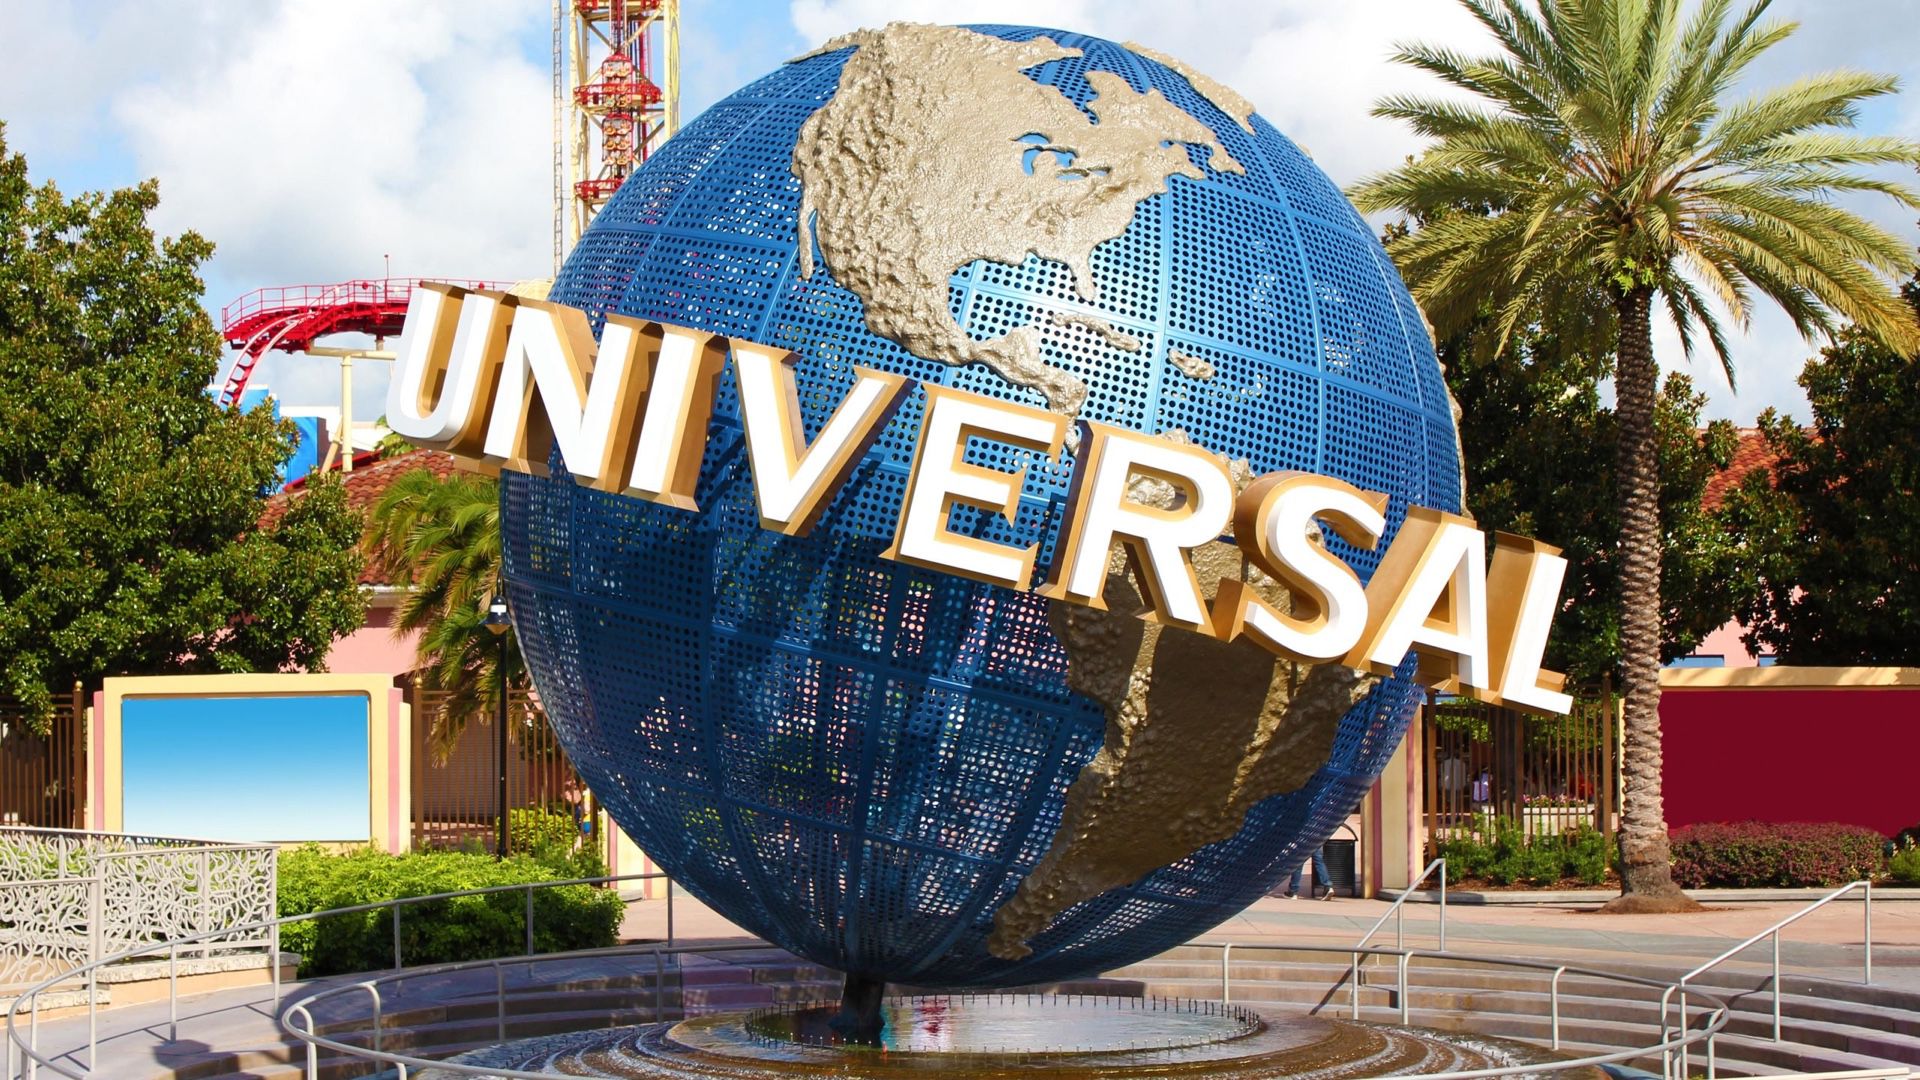 Universal and IOA 2-park tickets